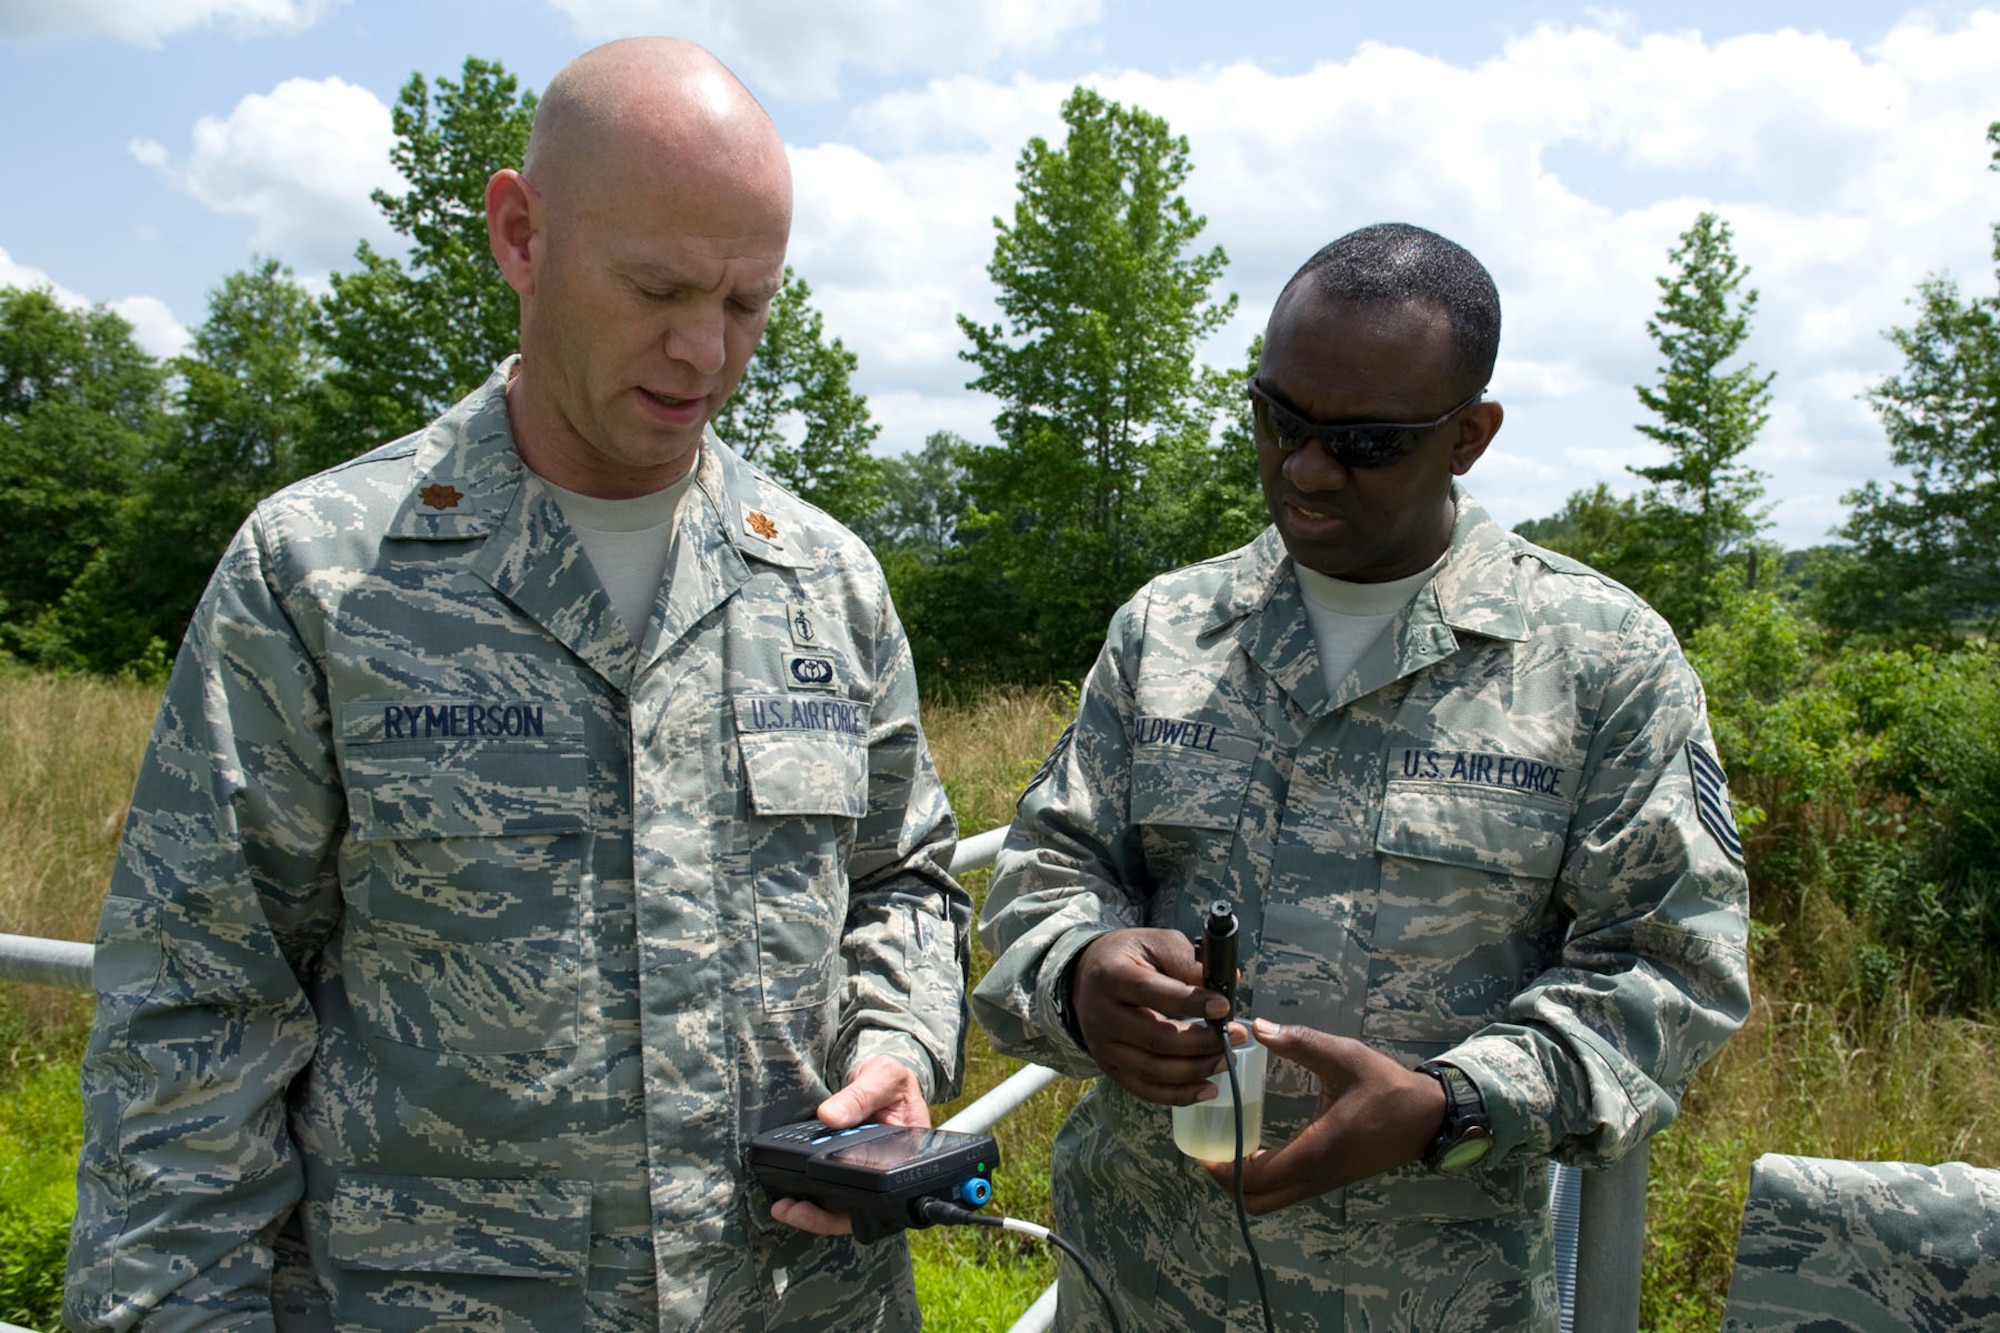 HAYNEVILLE, Ala. - Maj. Rick Rymerson, a  a bioenvironmental engineer with the 176th Medical Group, Alaska Air National Guard, and Tech. Sgt. Dainard Caldwell, a public health technician with group, test a ample of water from the City of Hayneville?s waste-water treatment lagoon for it pH balance, May 8, 2011.  Rymerson and Caldwell were in Alabama to help test the waste water for permit compliance and related treatment adjustments, and with drinking water for chlorine amount. They were also deploy with another seventy servicemembers from numerous military components and services in Hayneville for an Innovative Readiness Training (IRT) mission. The IRT program allows for real world training opportunities for military personnel while providing needed services to under-served communities in the United States. Alaska Air National Guard photo by Master Sgt. Shannon Oleson.